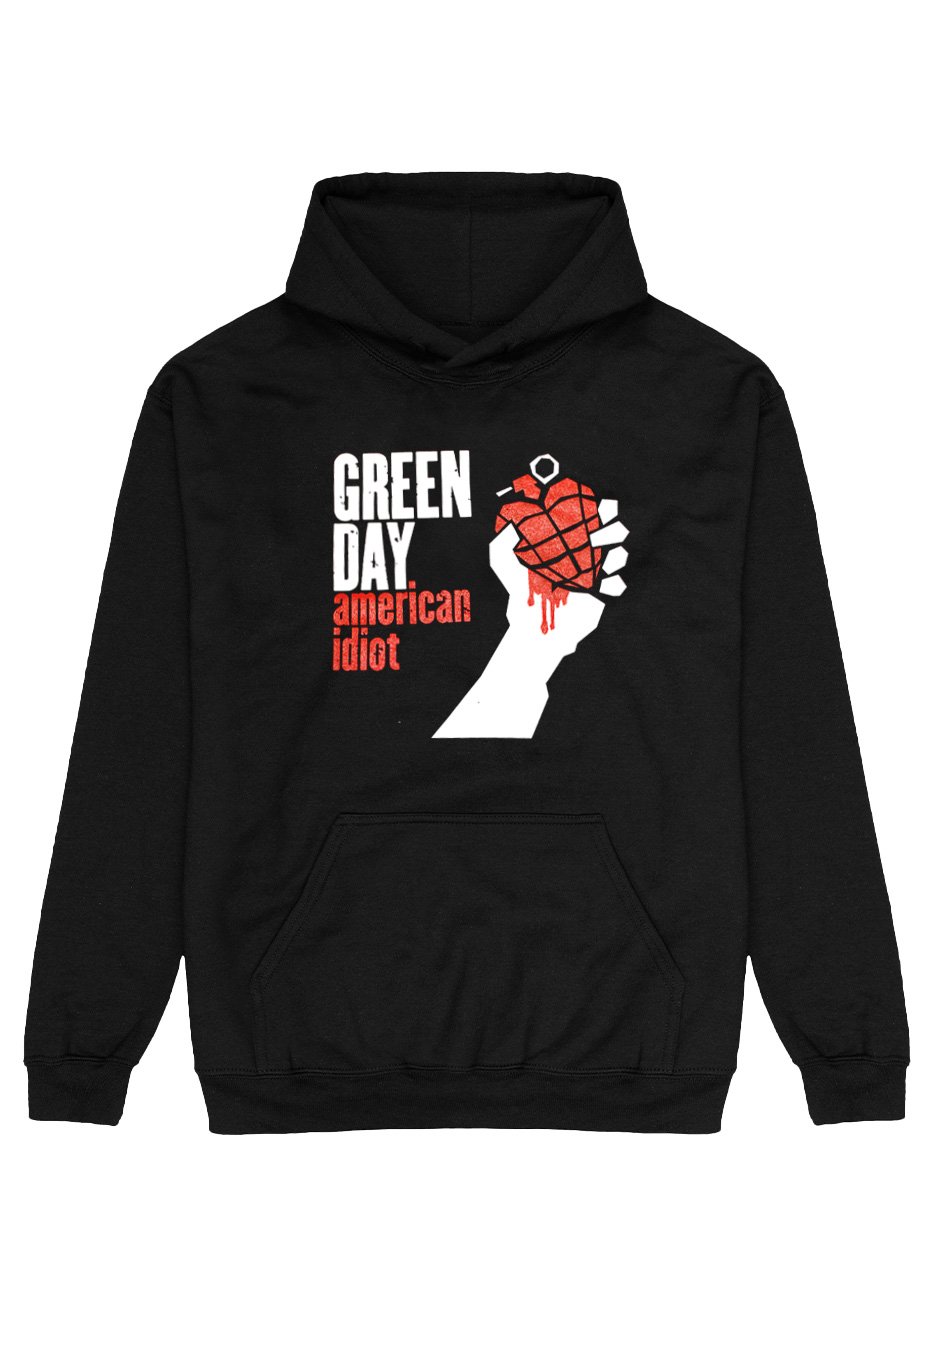 Green Day - American Idiot - Hoodie